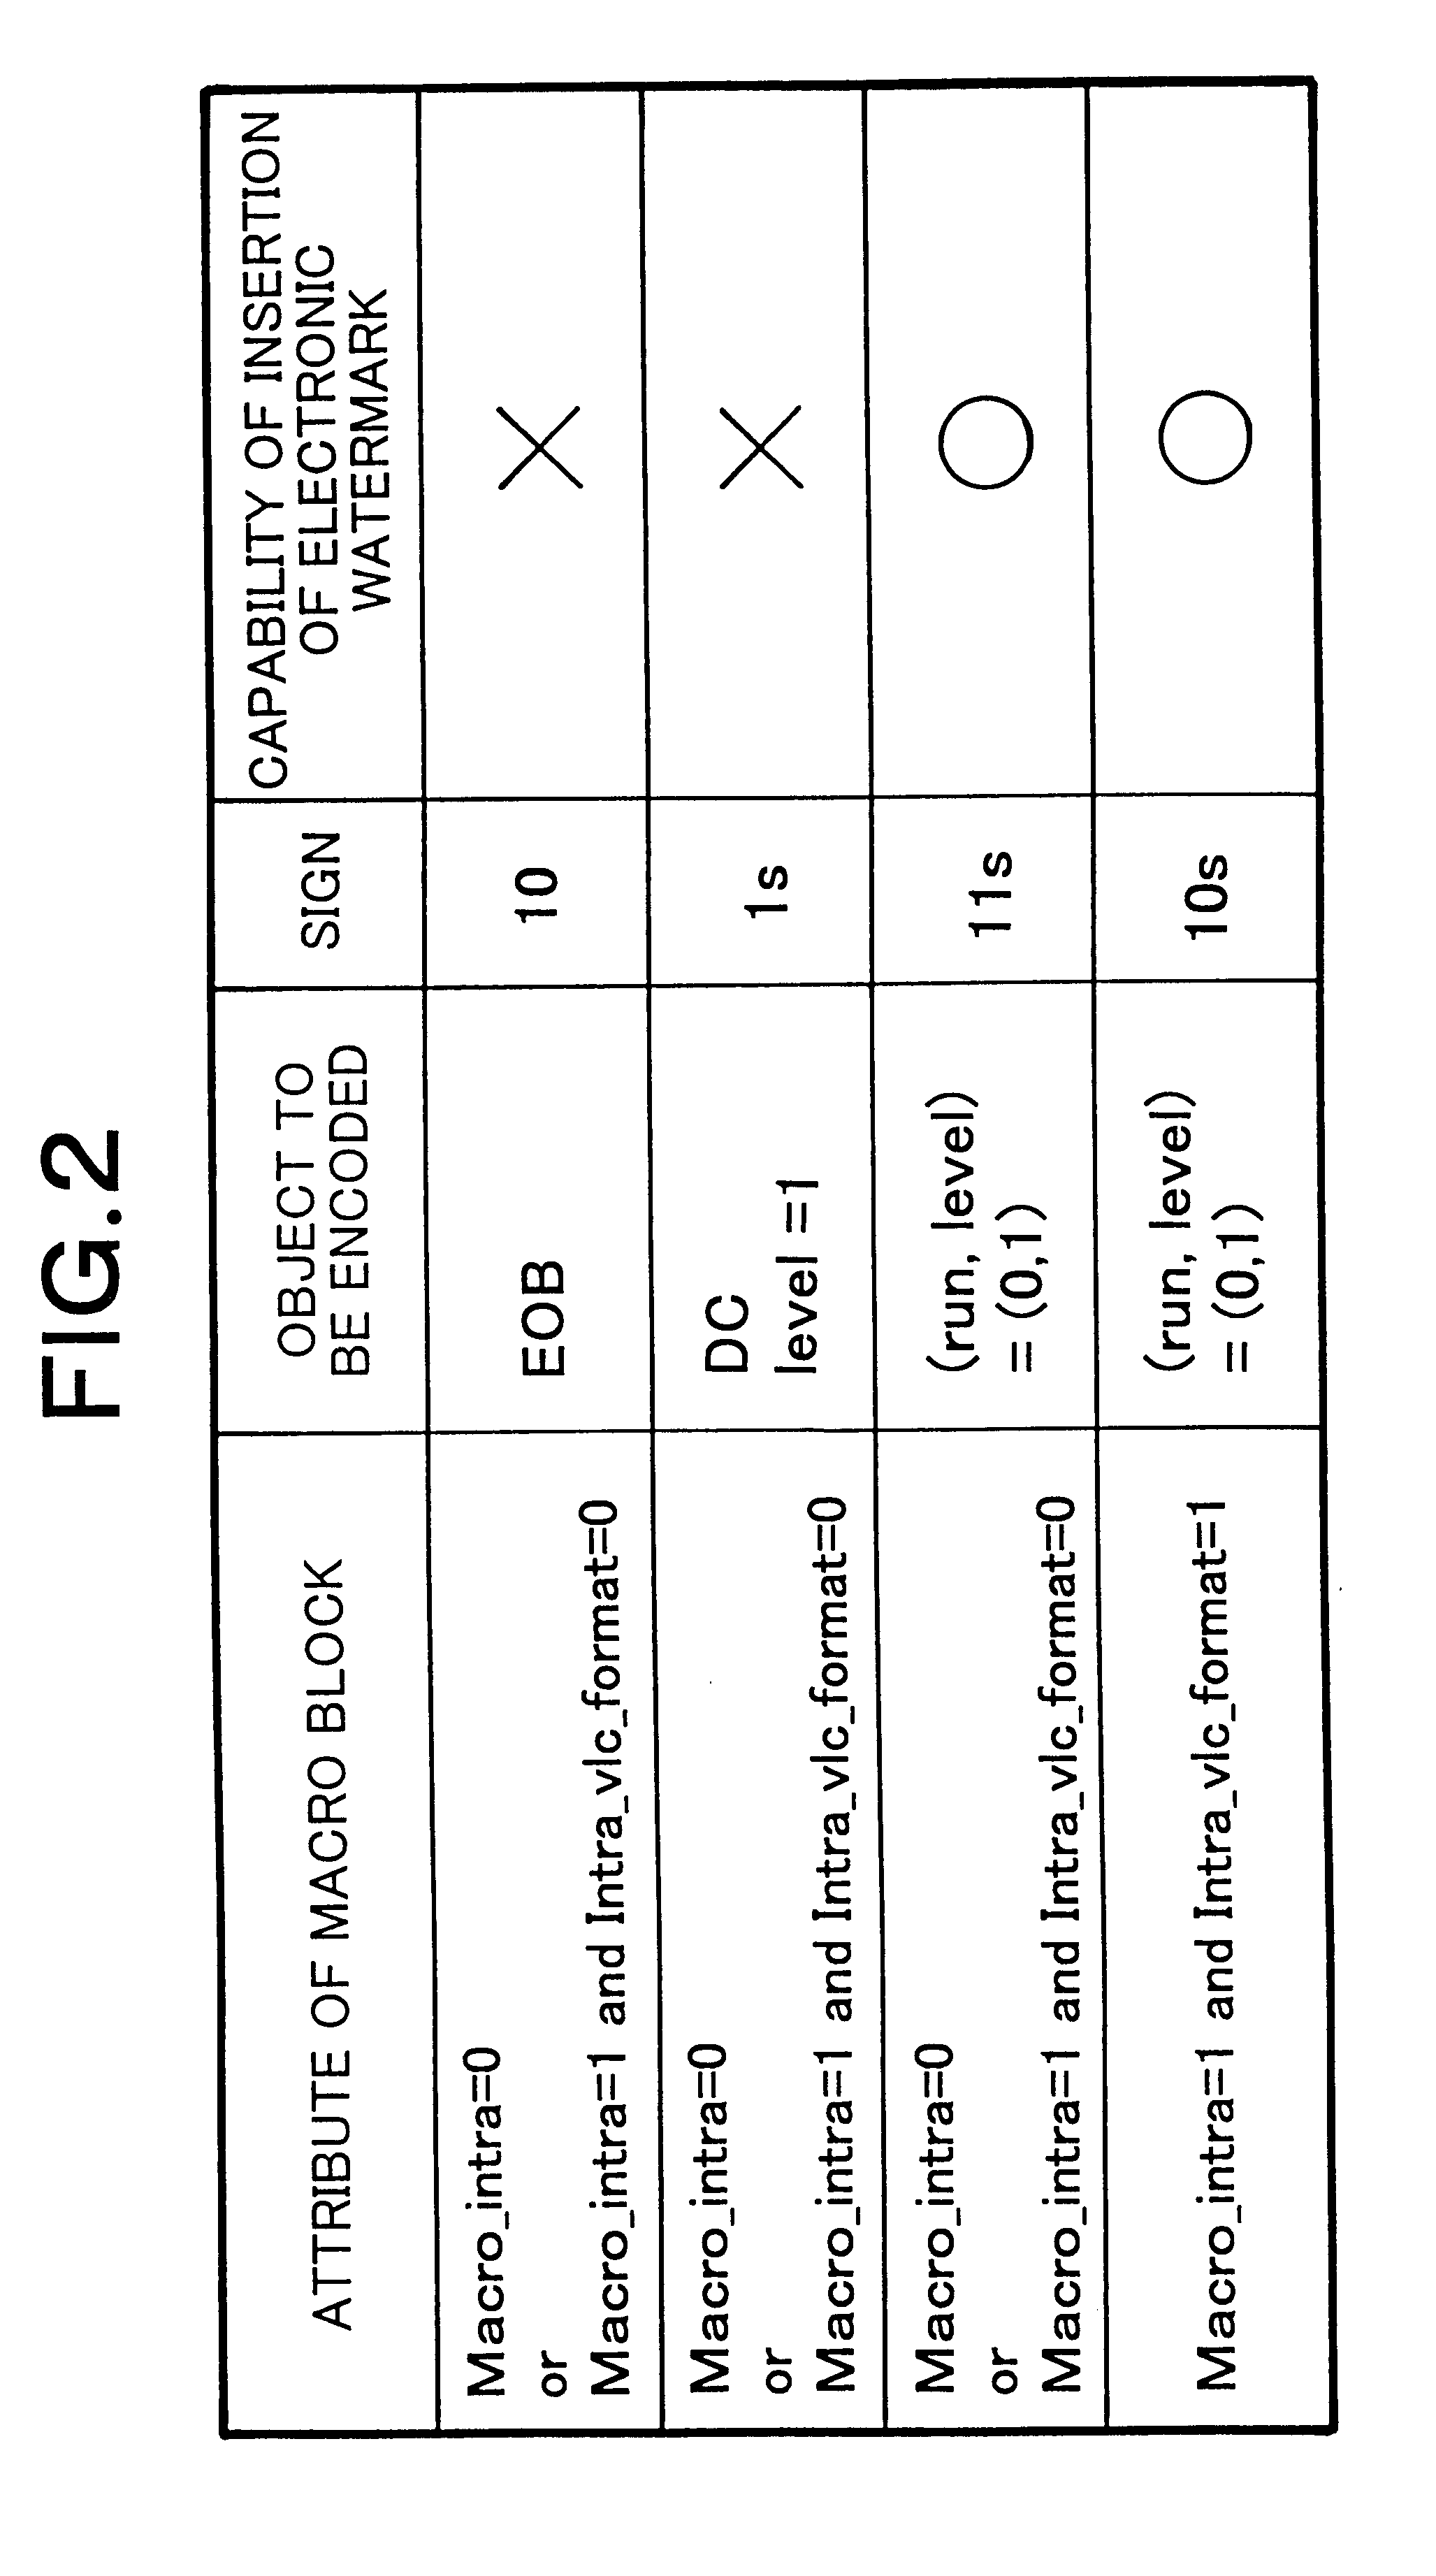 System and method for preventing input of variable length codes from being interrupted